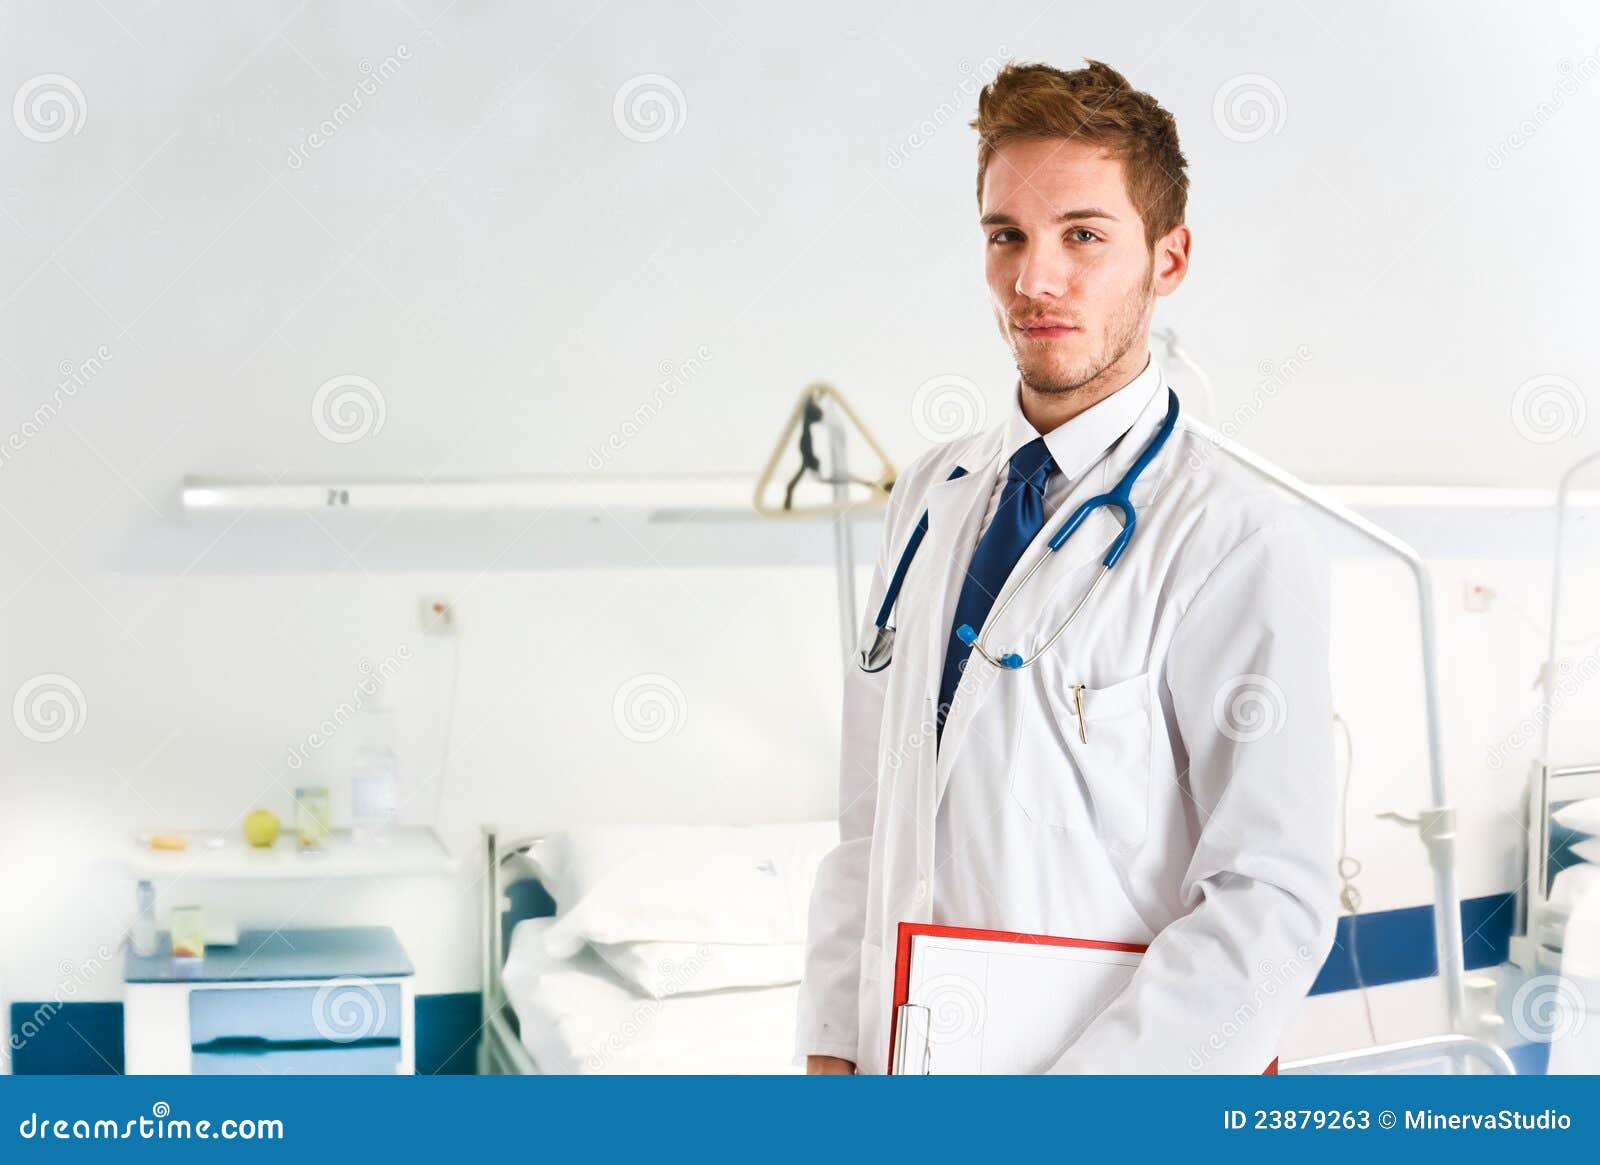 Doctor at work stock image. Image of worker, stethoscope - 23879263